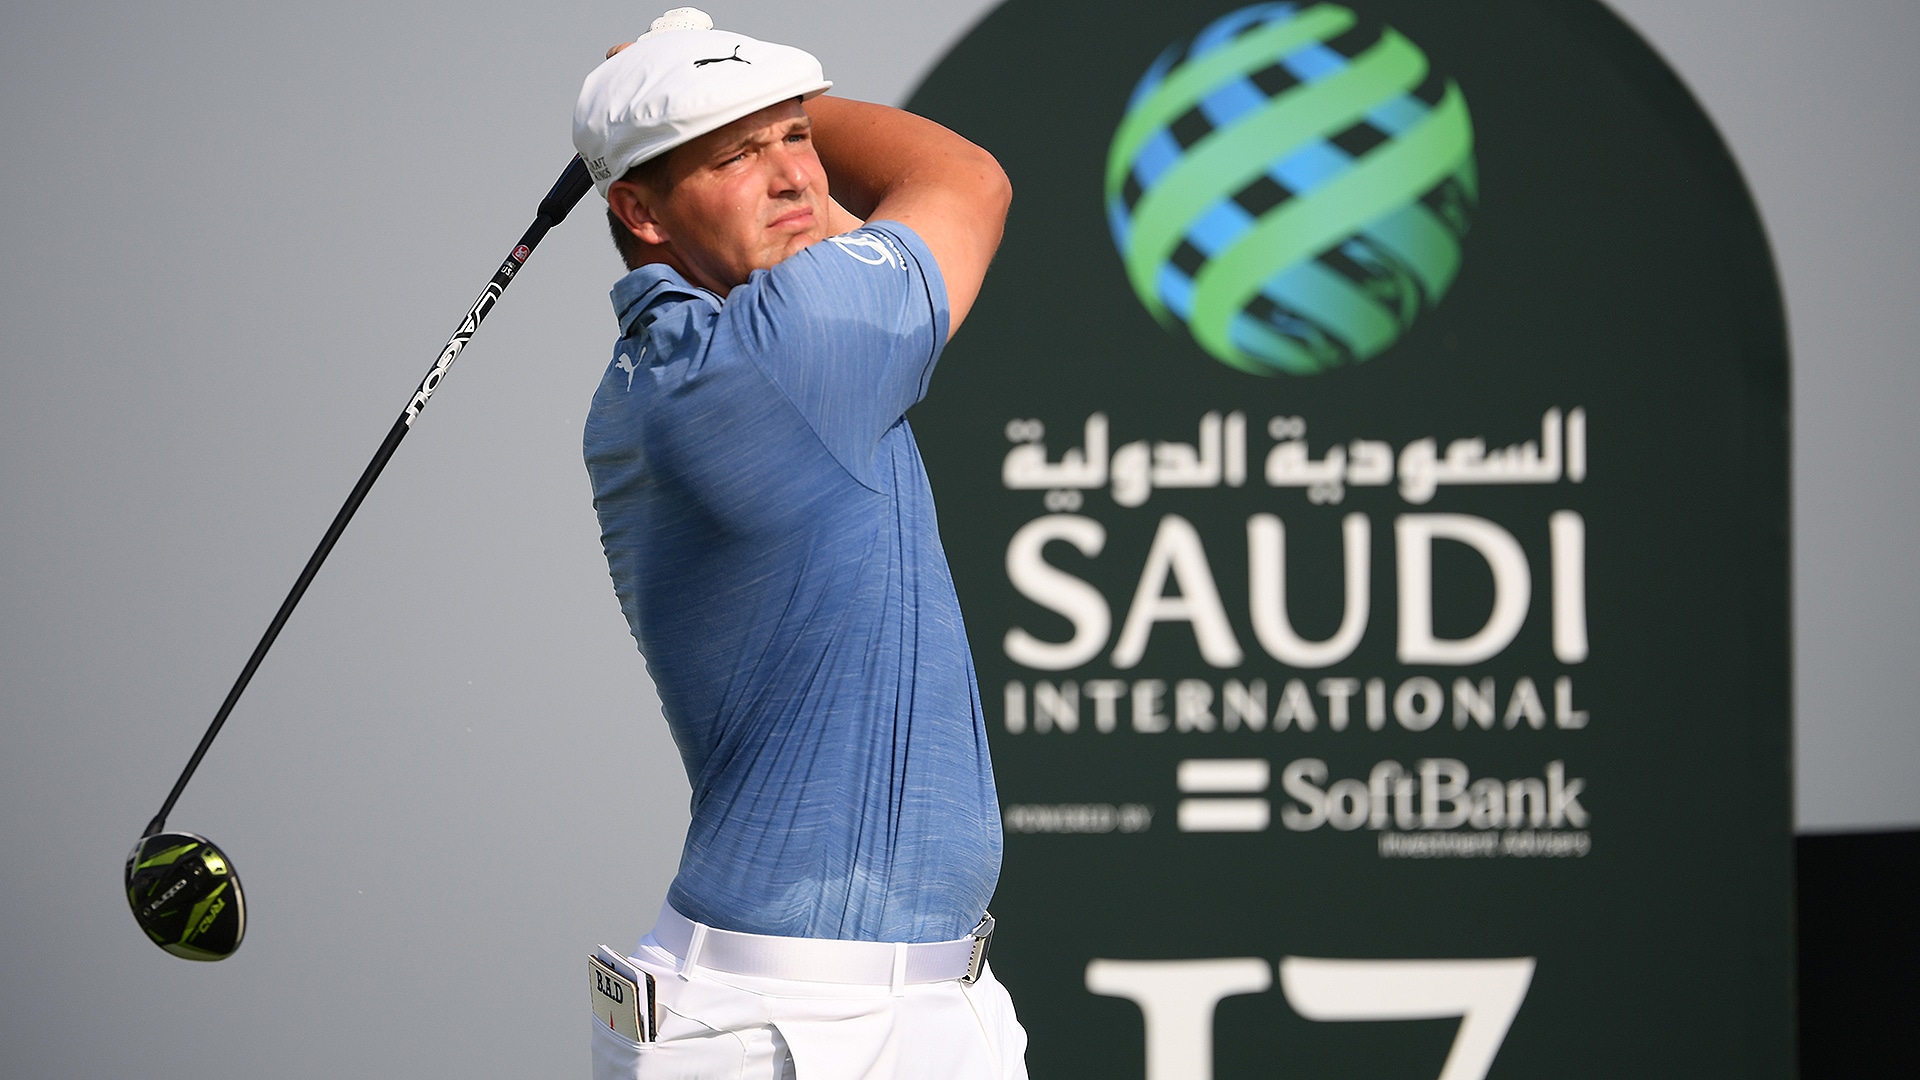 From Bryson to Phil to Reed, where the big names stand after Rd. 1 at Saudi International